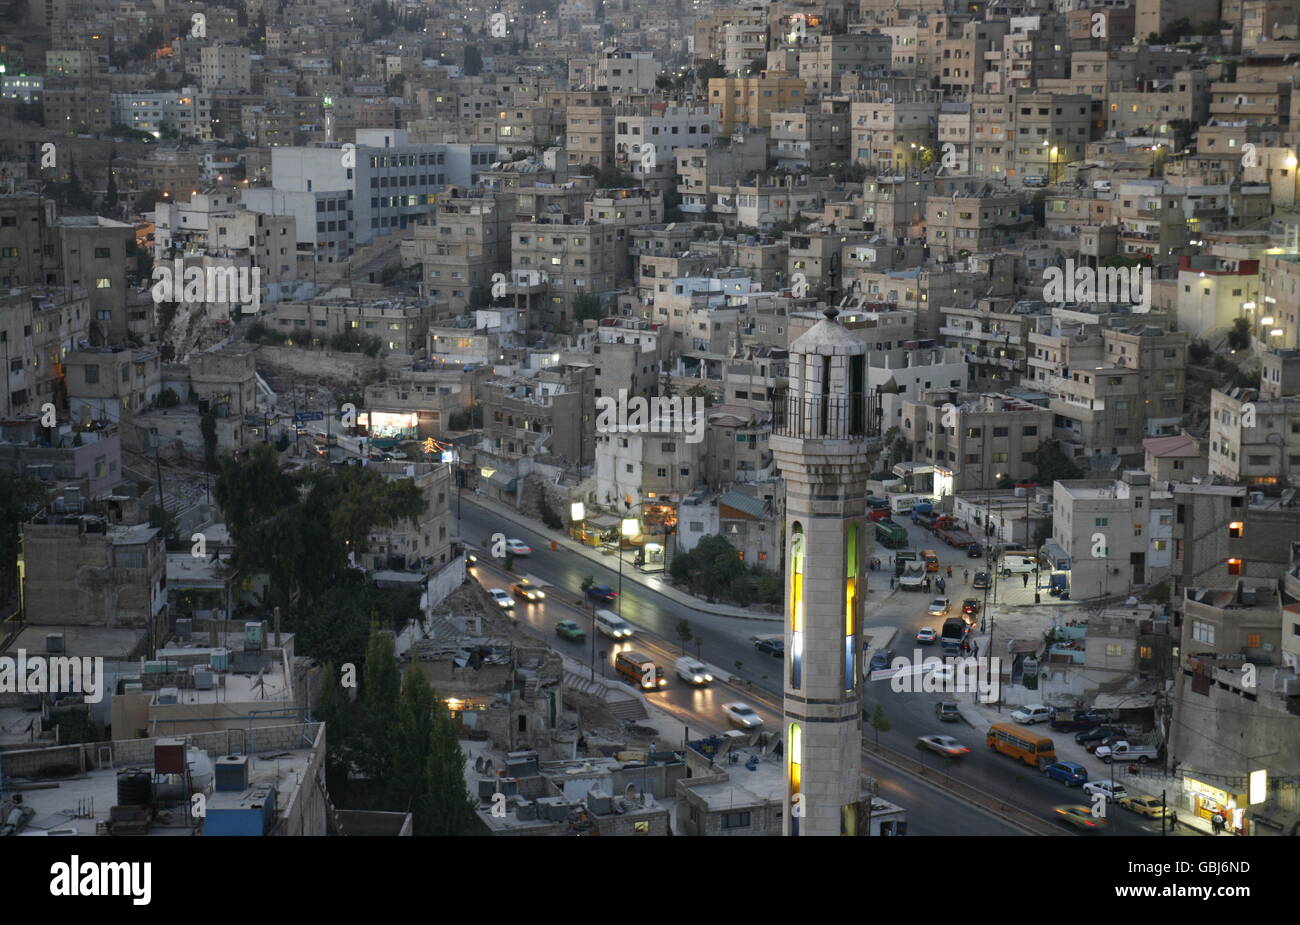 The City Centre of the City Amman in Jordan in the middle east. Stock Photo